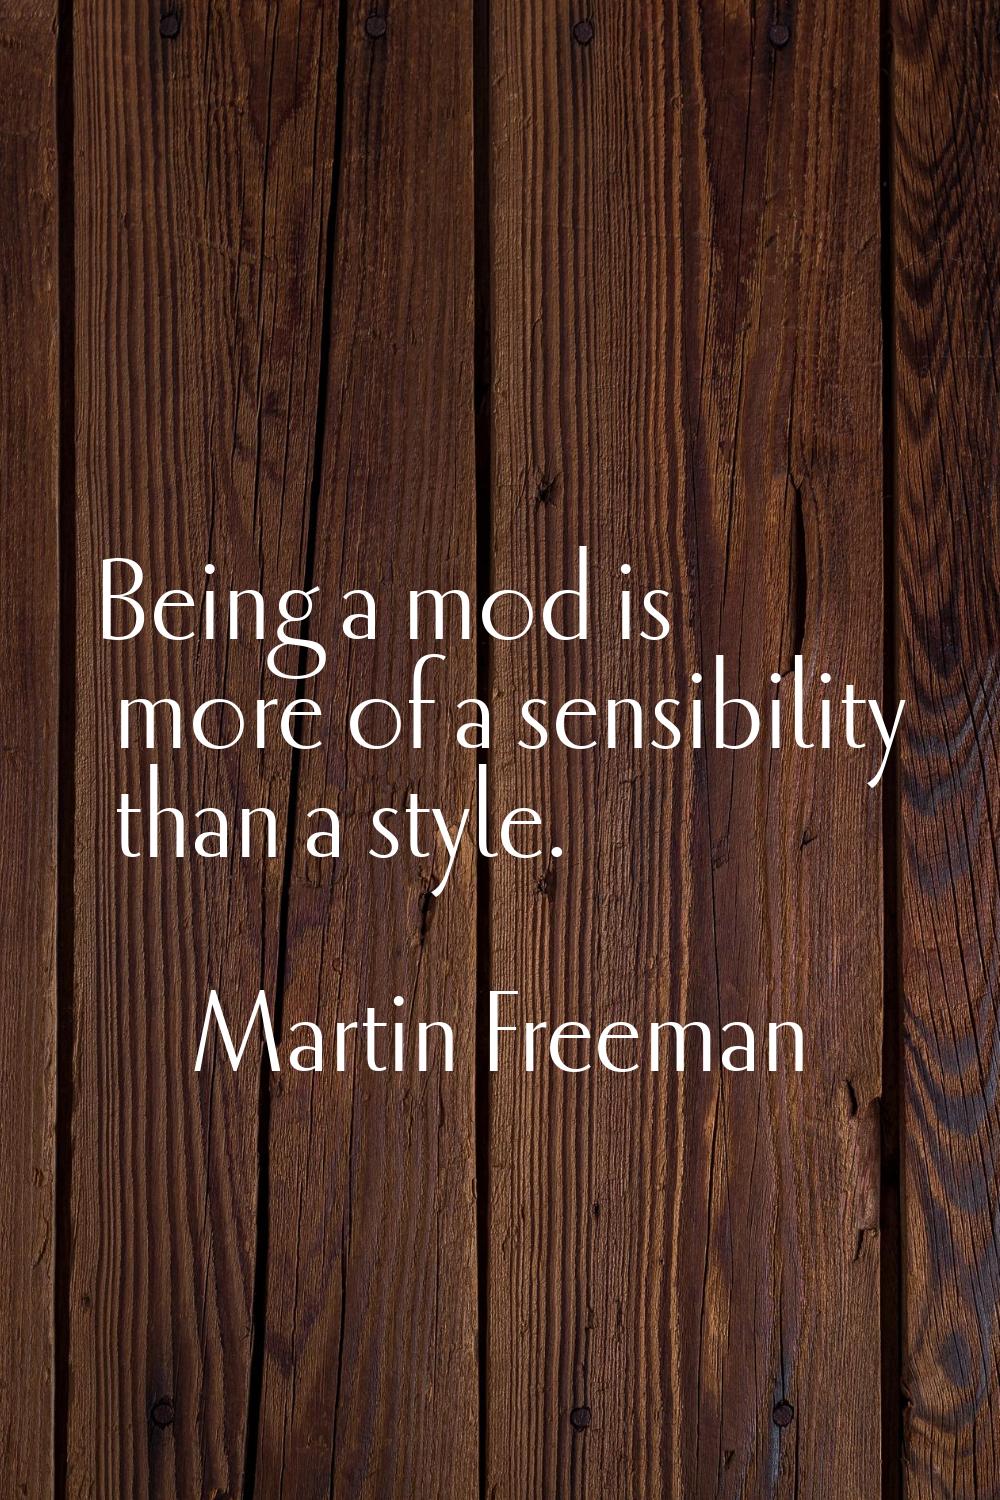 Being a mod is more of a sensibility than a style.